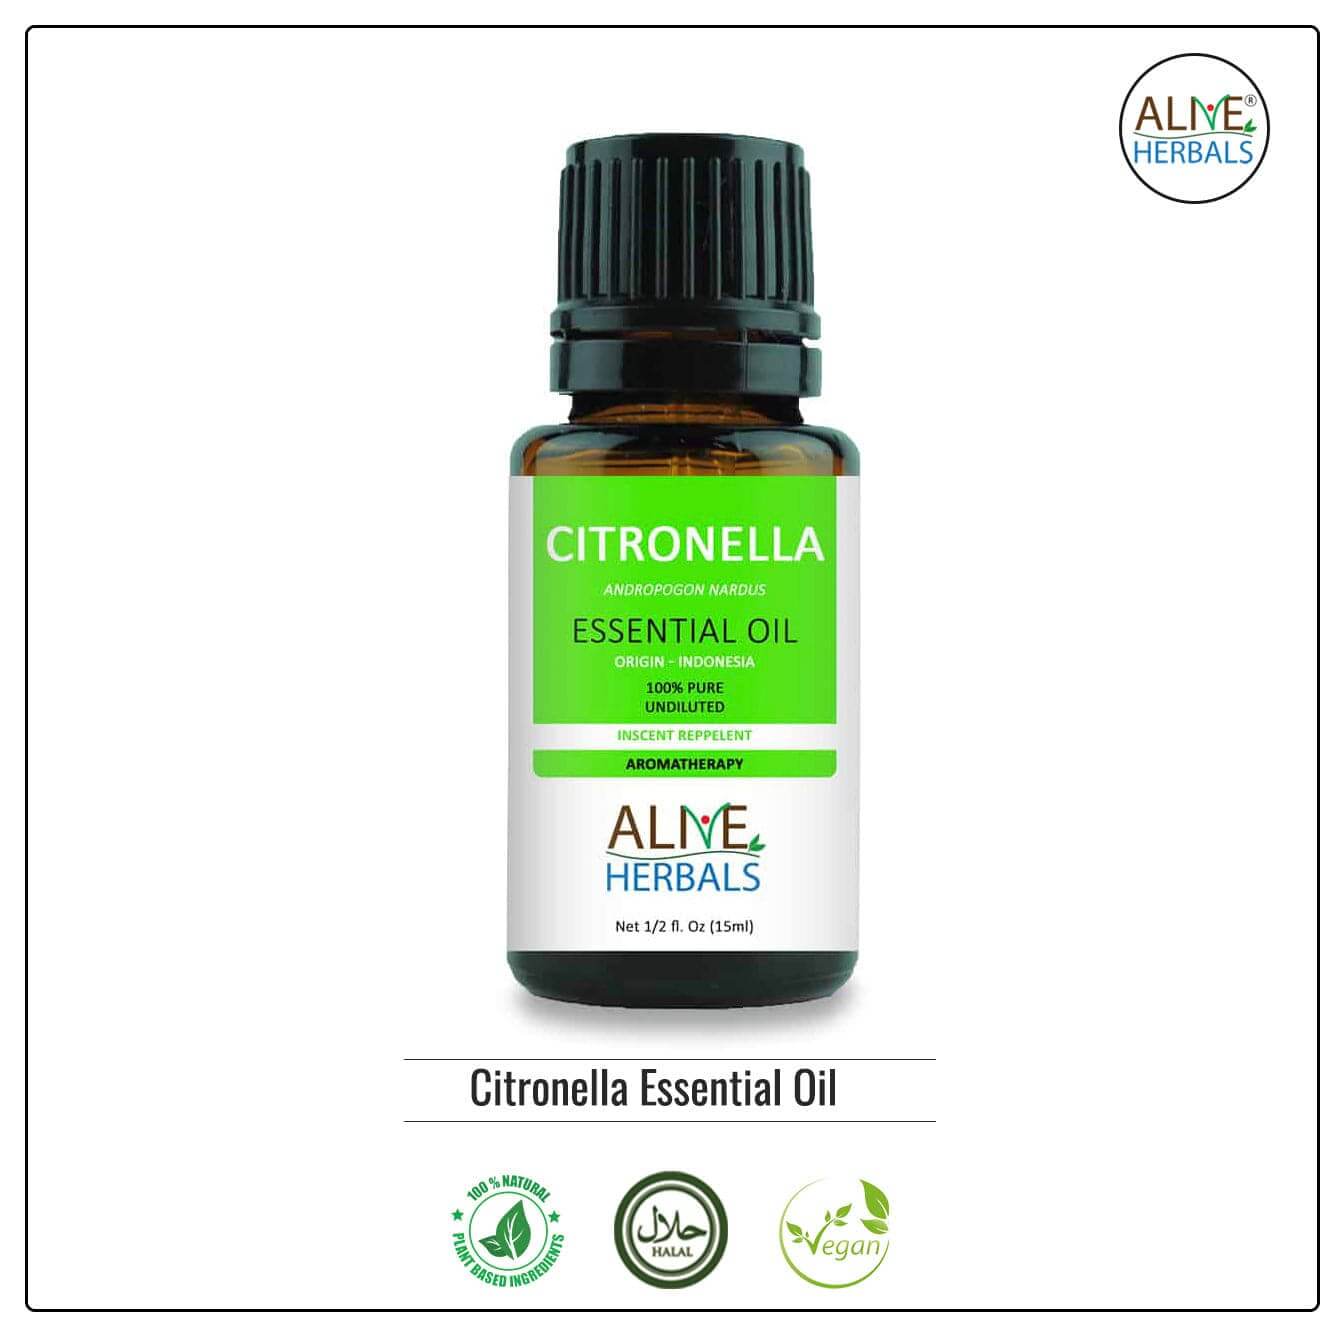 Citronella Essential Oil - Buy at Natural Food Store | Alive Herbals.